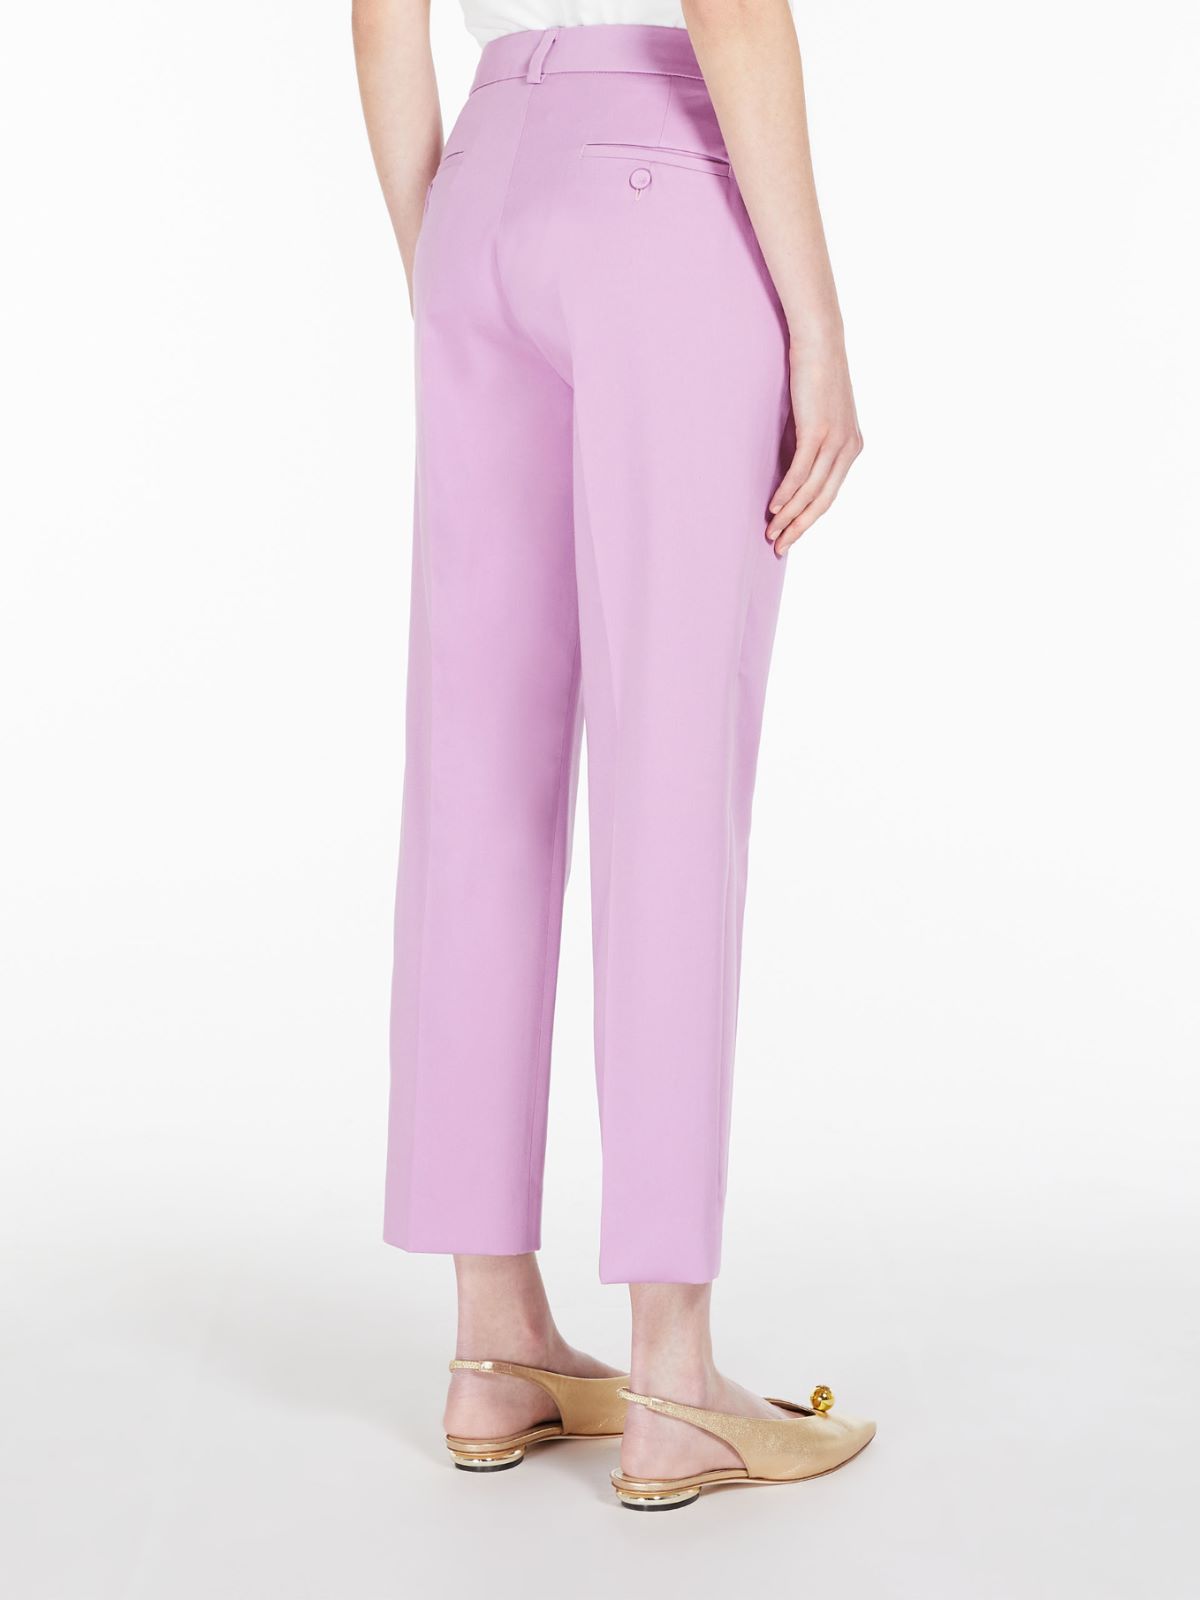 Trousers in stretch satin  - LILAC - Weekend Max Mara - 3